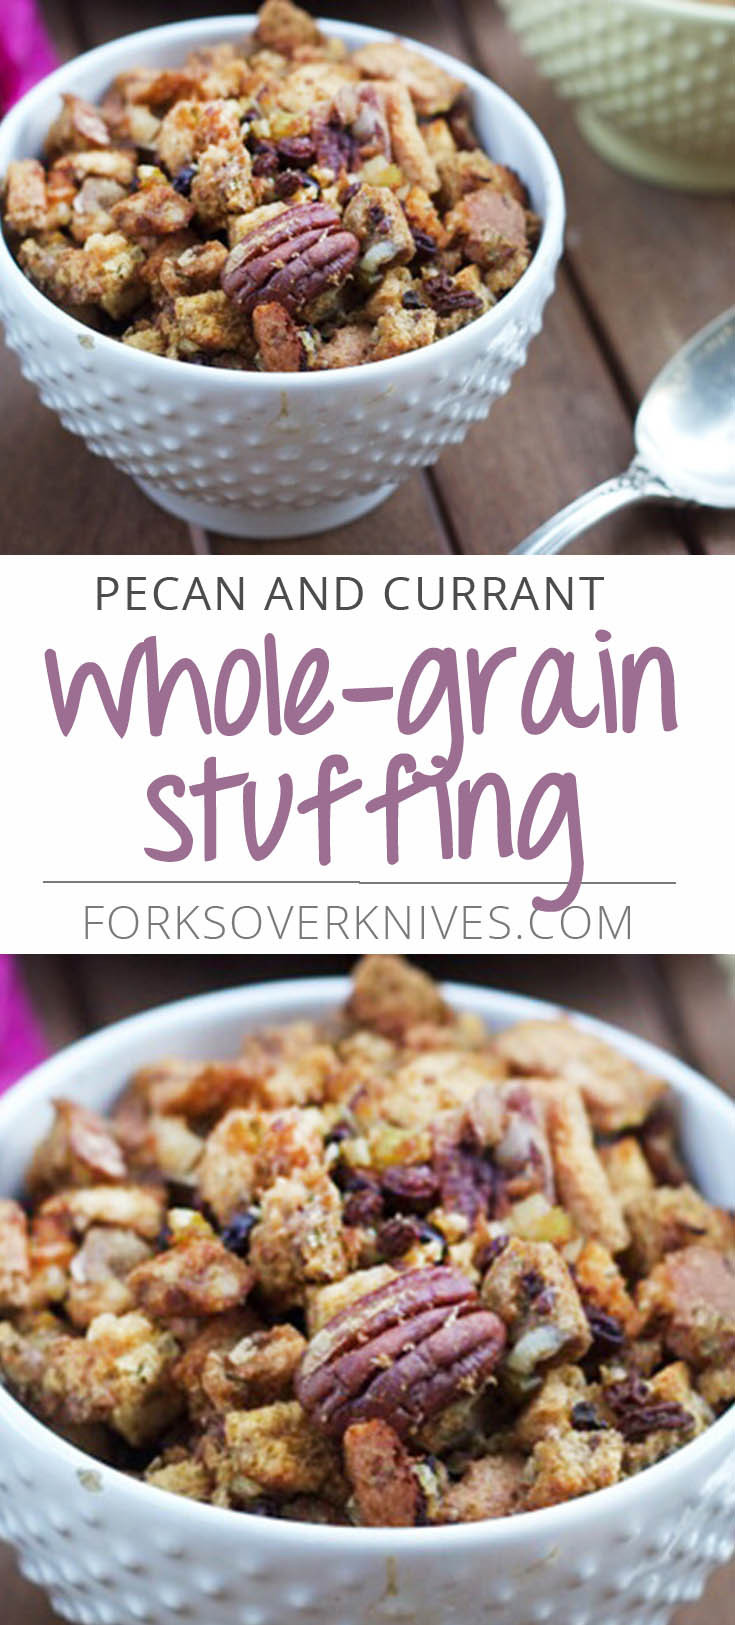 Whole Grain Plant Based Recipes
 Whole Grain Stuffing with Pecans and Currants Plant